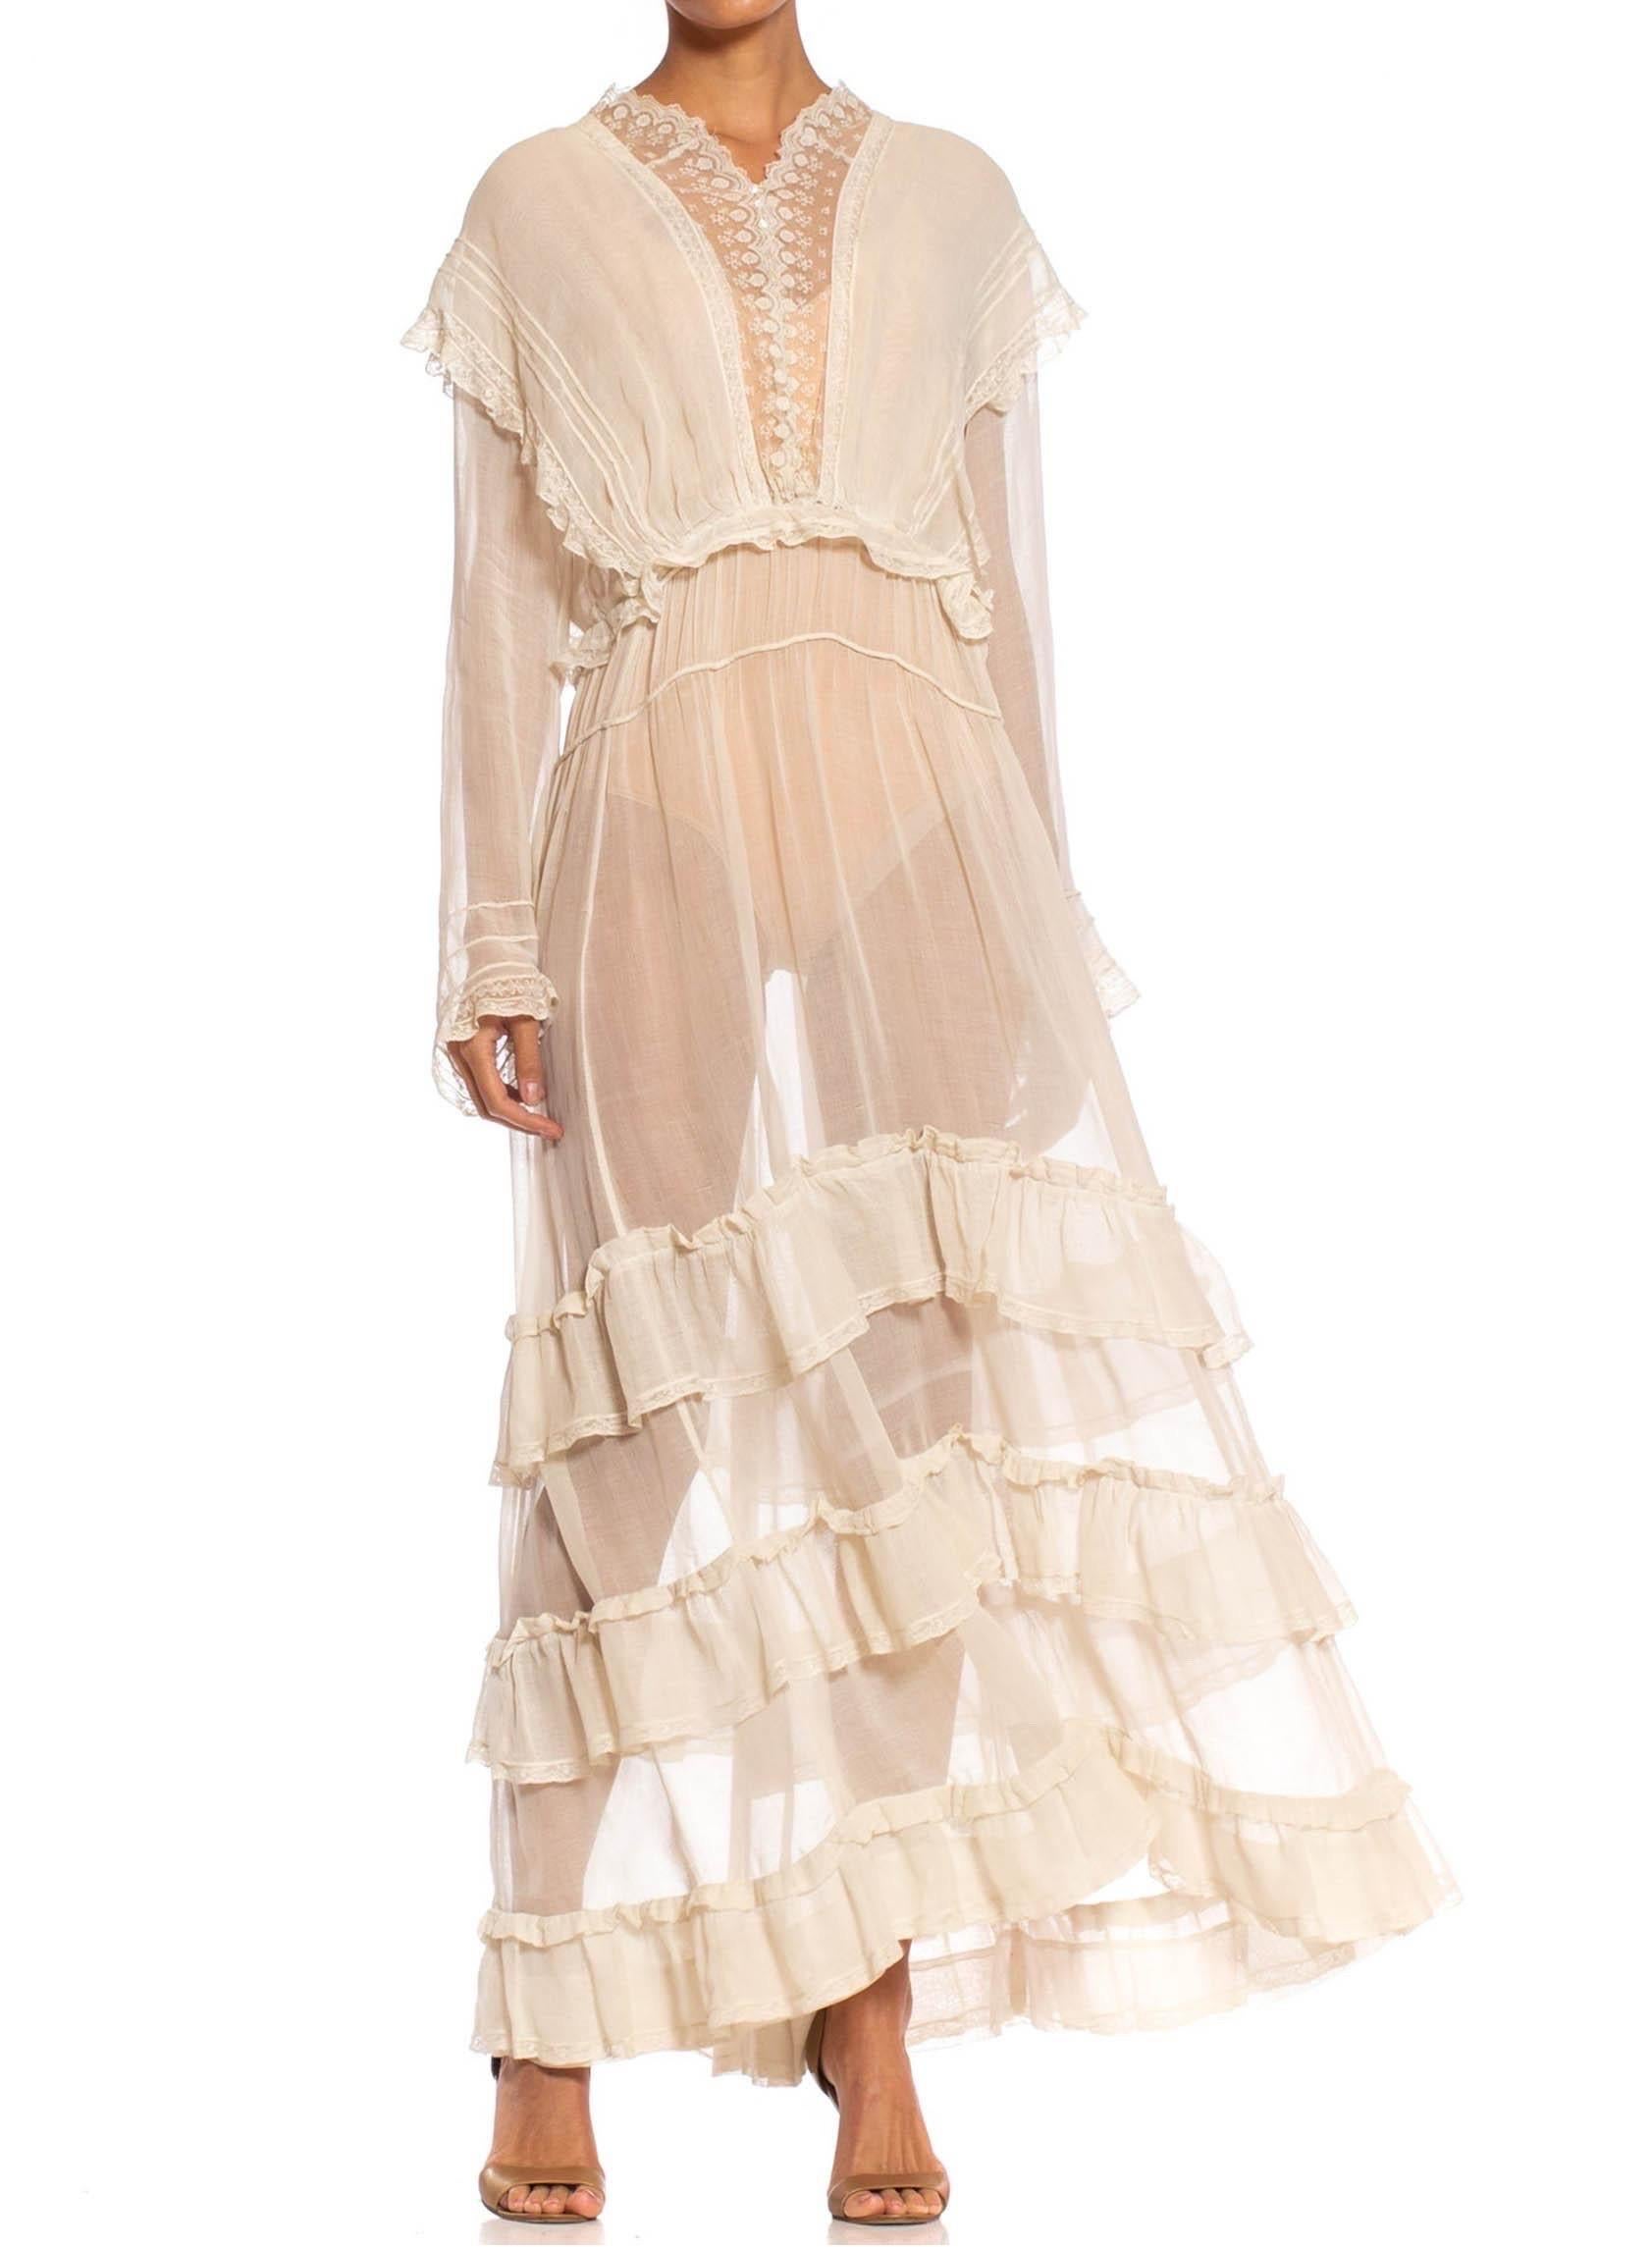 Women's Edwardian Off White Organic Cotton Voile & Lace Long Sleeved Ruffled Tea Dress For Sale